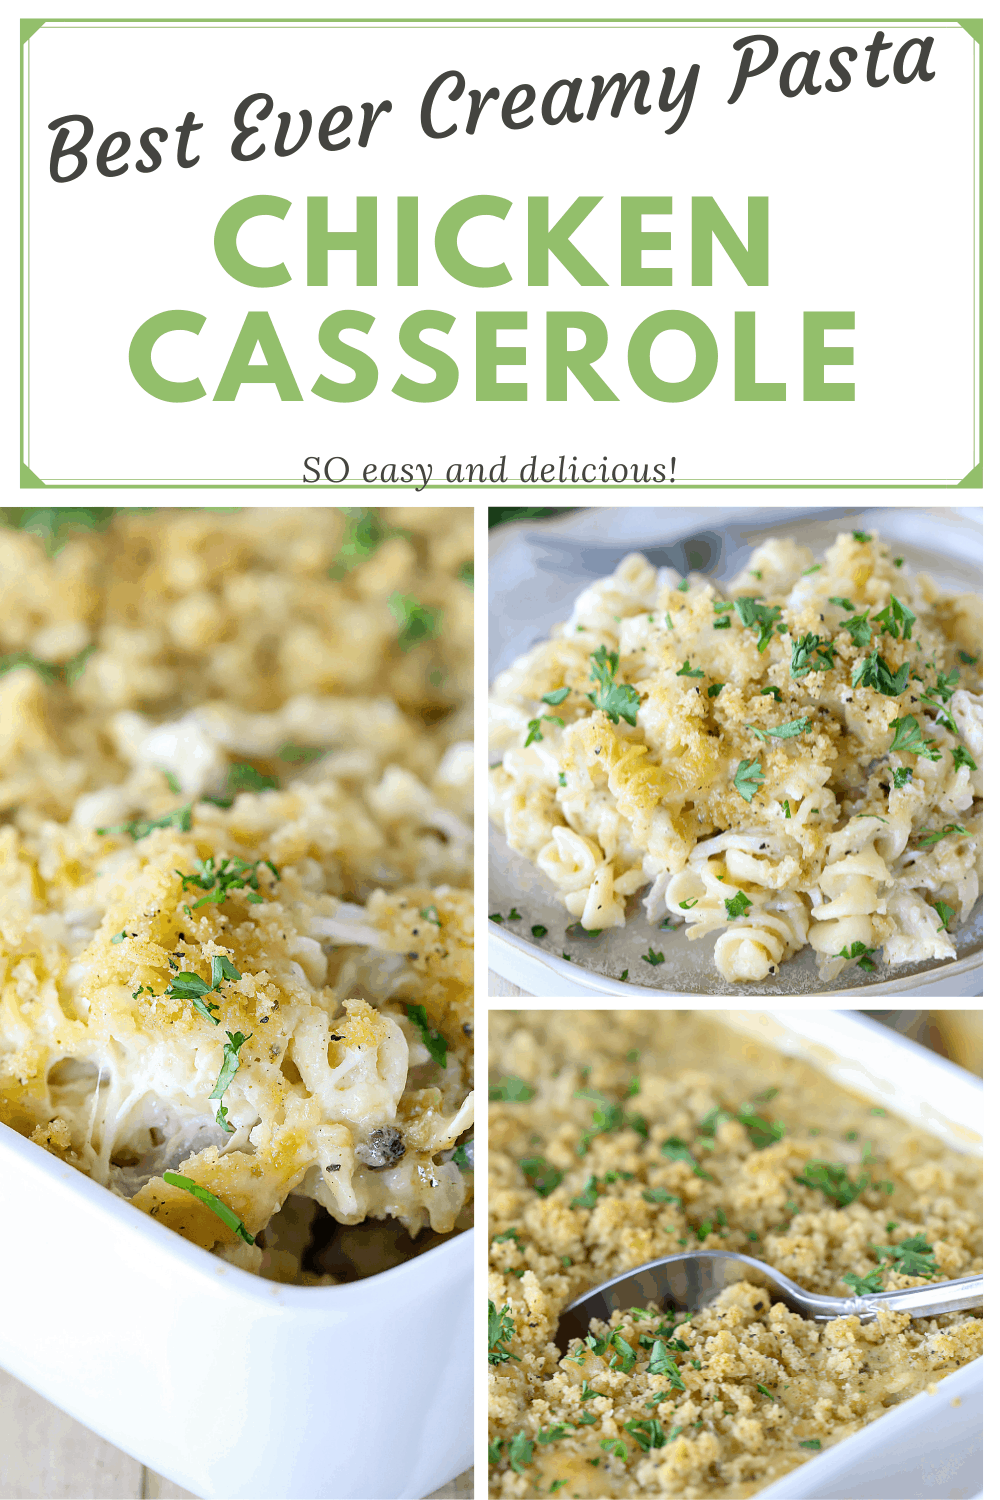 Looking for an easy, cheesy and family approved dinner recipe? You NEED this Creamy Chicken Pasta Casserole in your life! It's always a hit and makes great leftovers (if there are any!) #chicken #dinner #easy #yummy #casserole #pasta #familydinner #yummyhealthyeasy via @jennikolaus